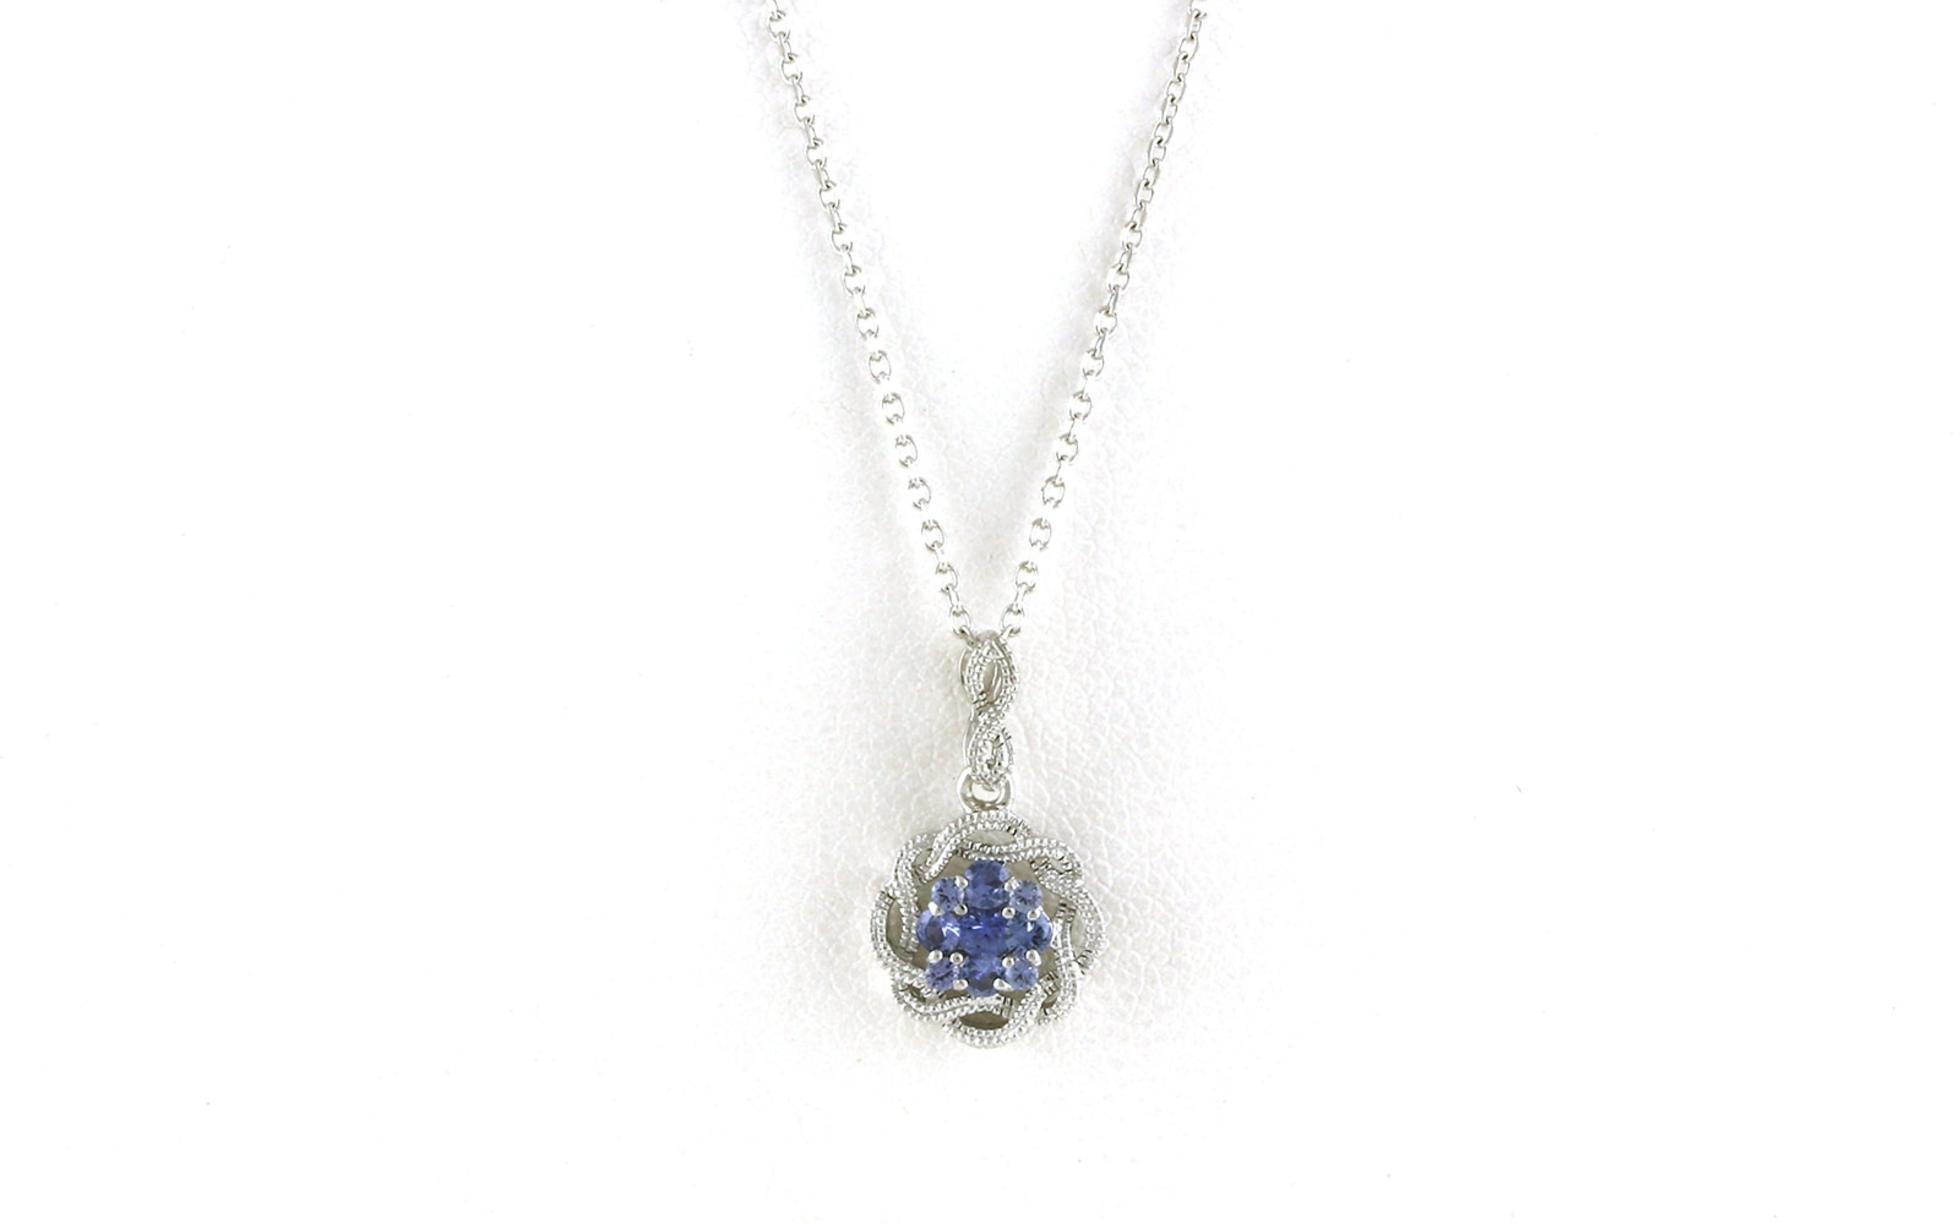 Woven Halo Montana Yogo Sapphire Cluster Necklace in White Gold (0.26cts TWT)